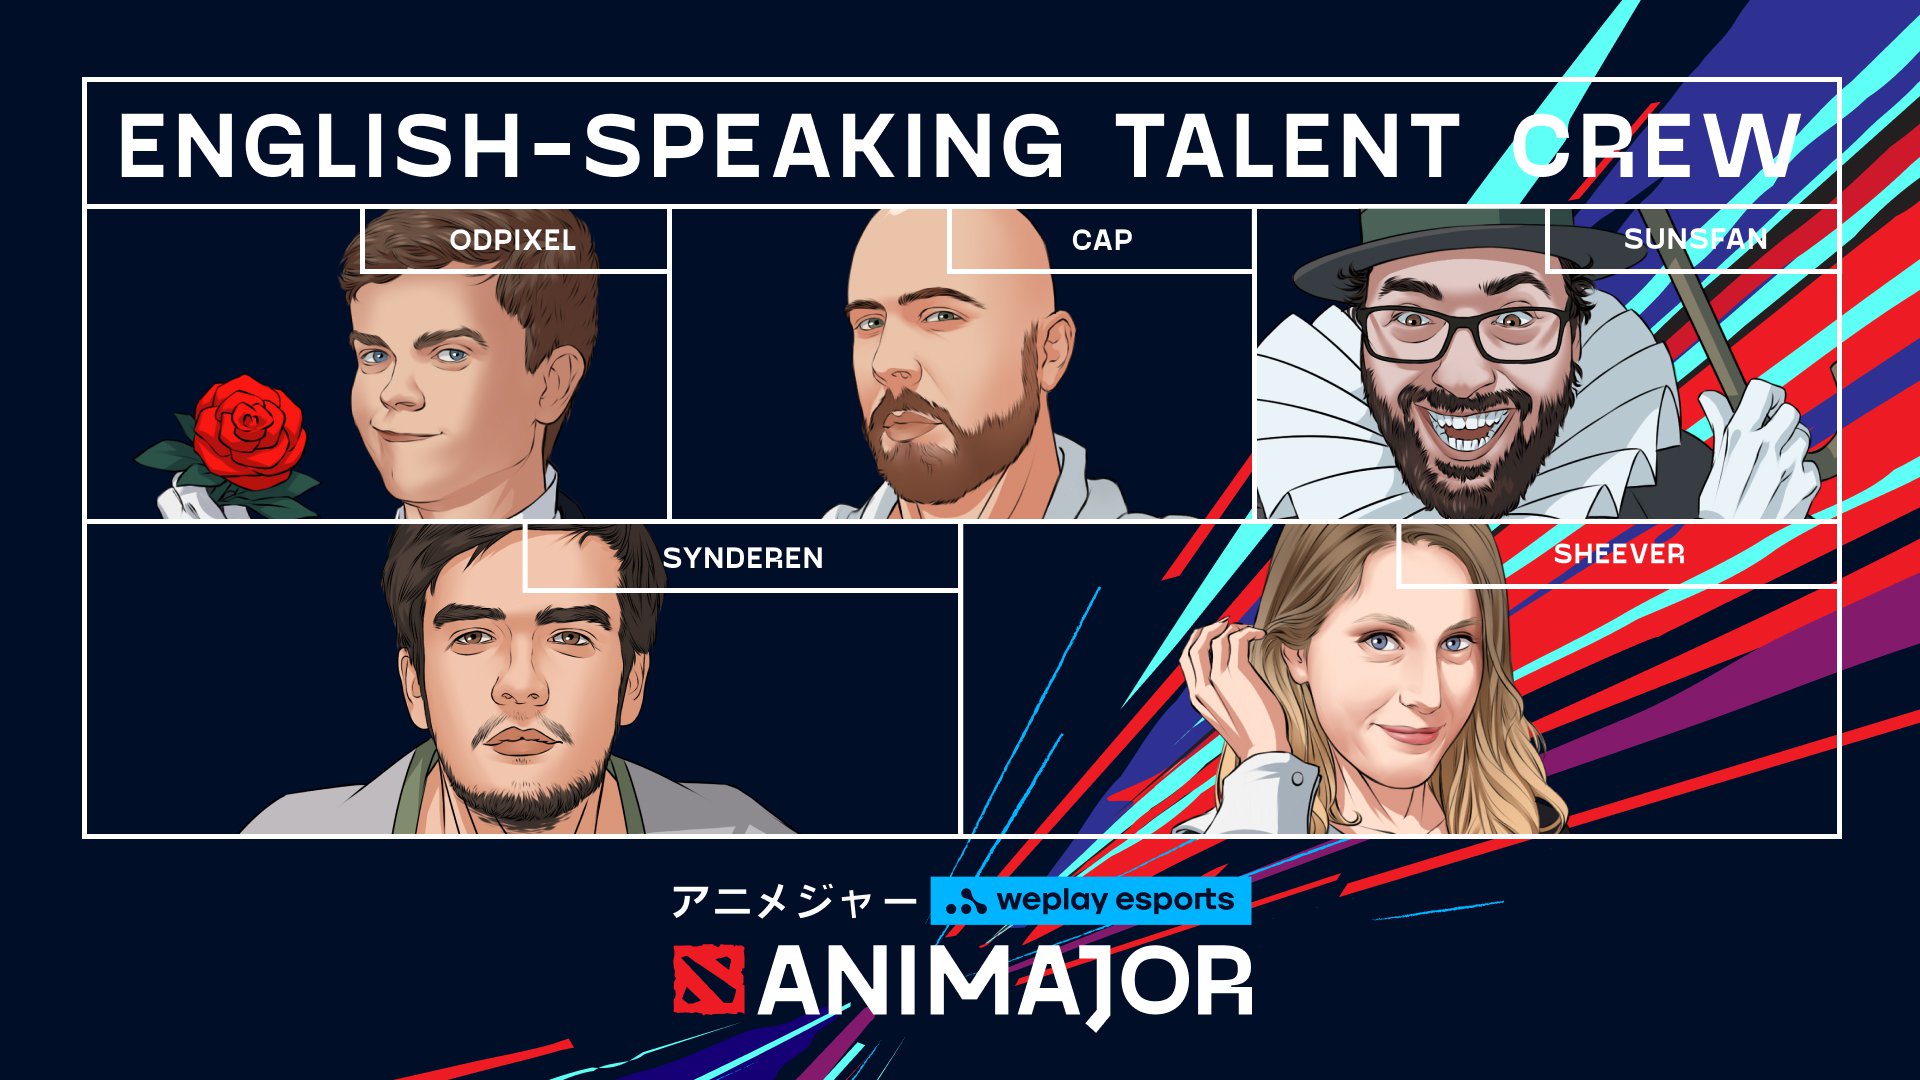 WePlay AniMajor English-speaking talent crew is announced. Image: WePlay Holding